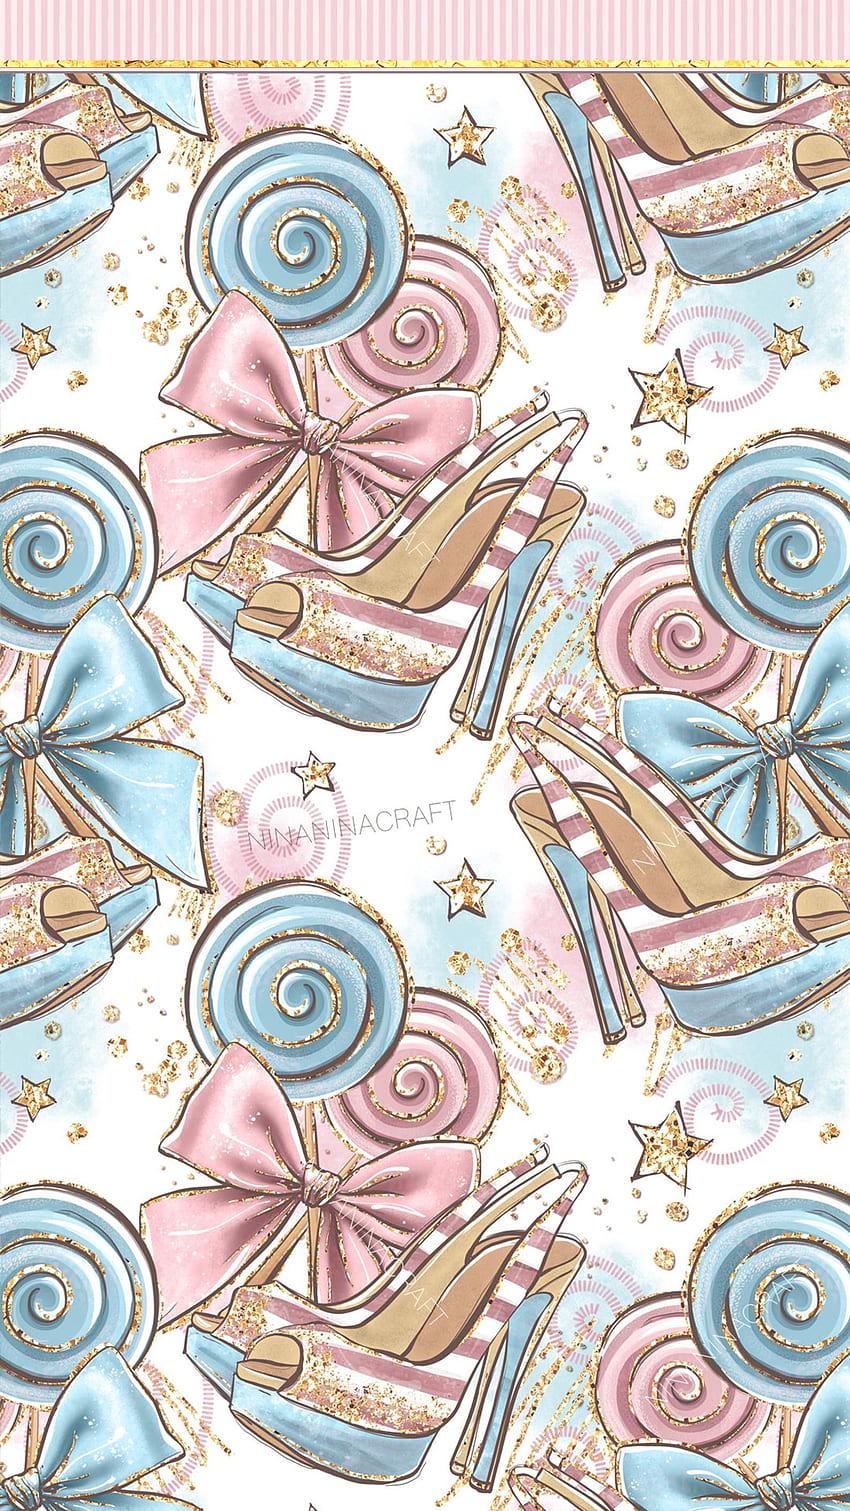 Cute Pink and Blue Clip Art Cute Glitter Planner Stickers. Etsy in 2021. Pink girly, Mermaid , Animal print, Aesthetic Candy Pattern HD phone wallpaper